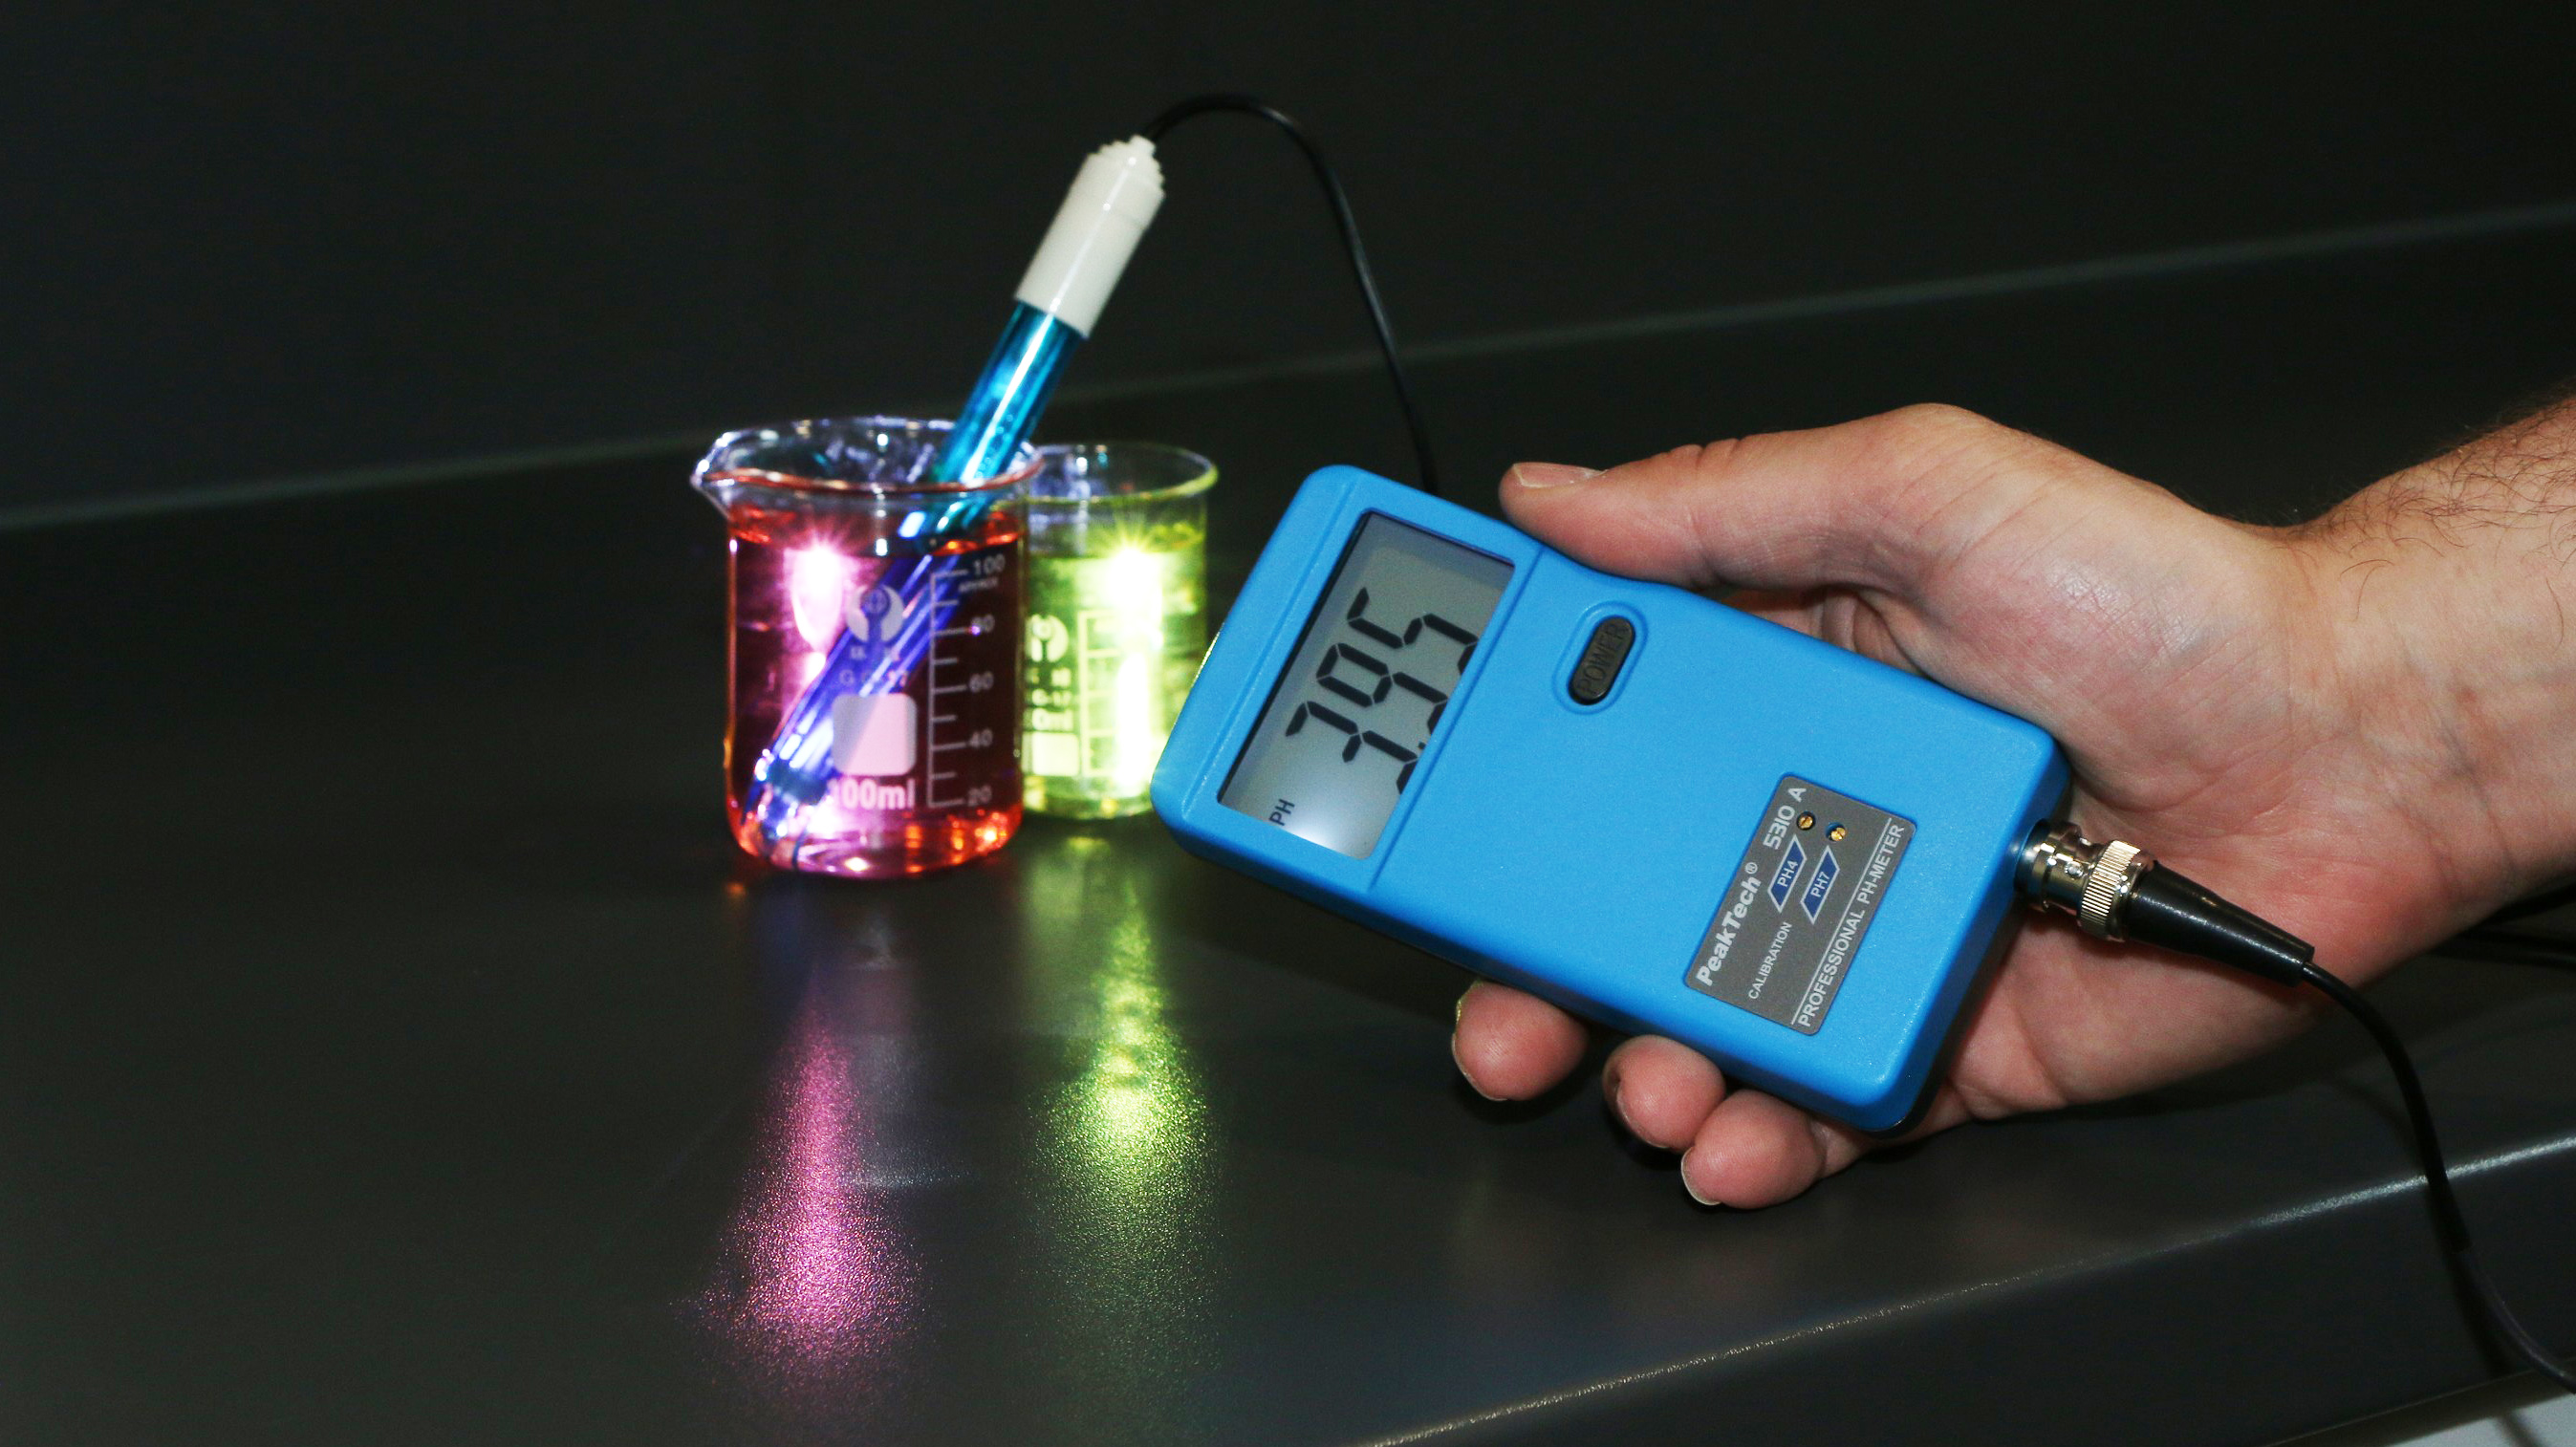 «PeakTech® P 5310 A» PH Tester with external probe